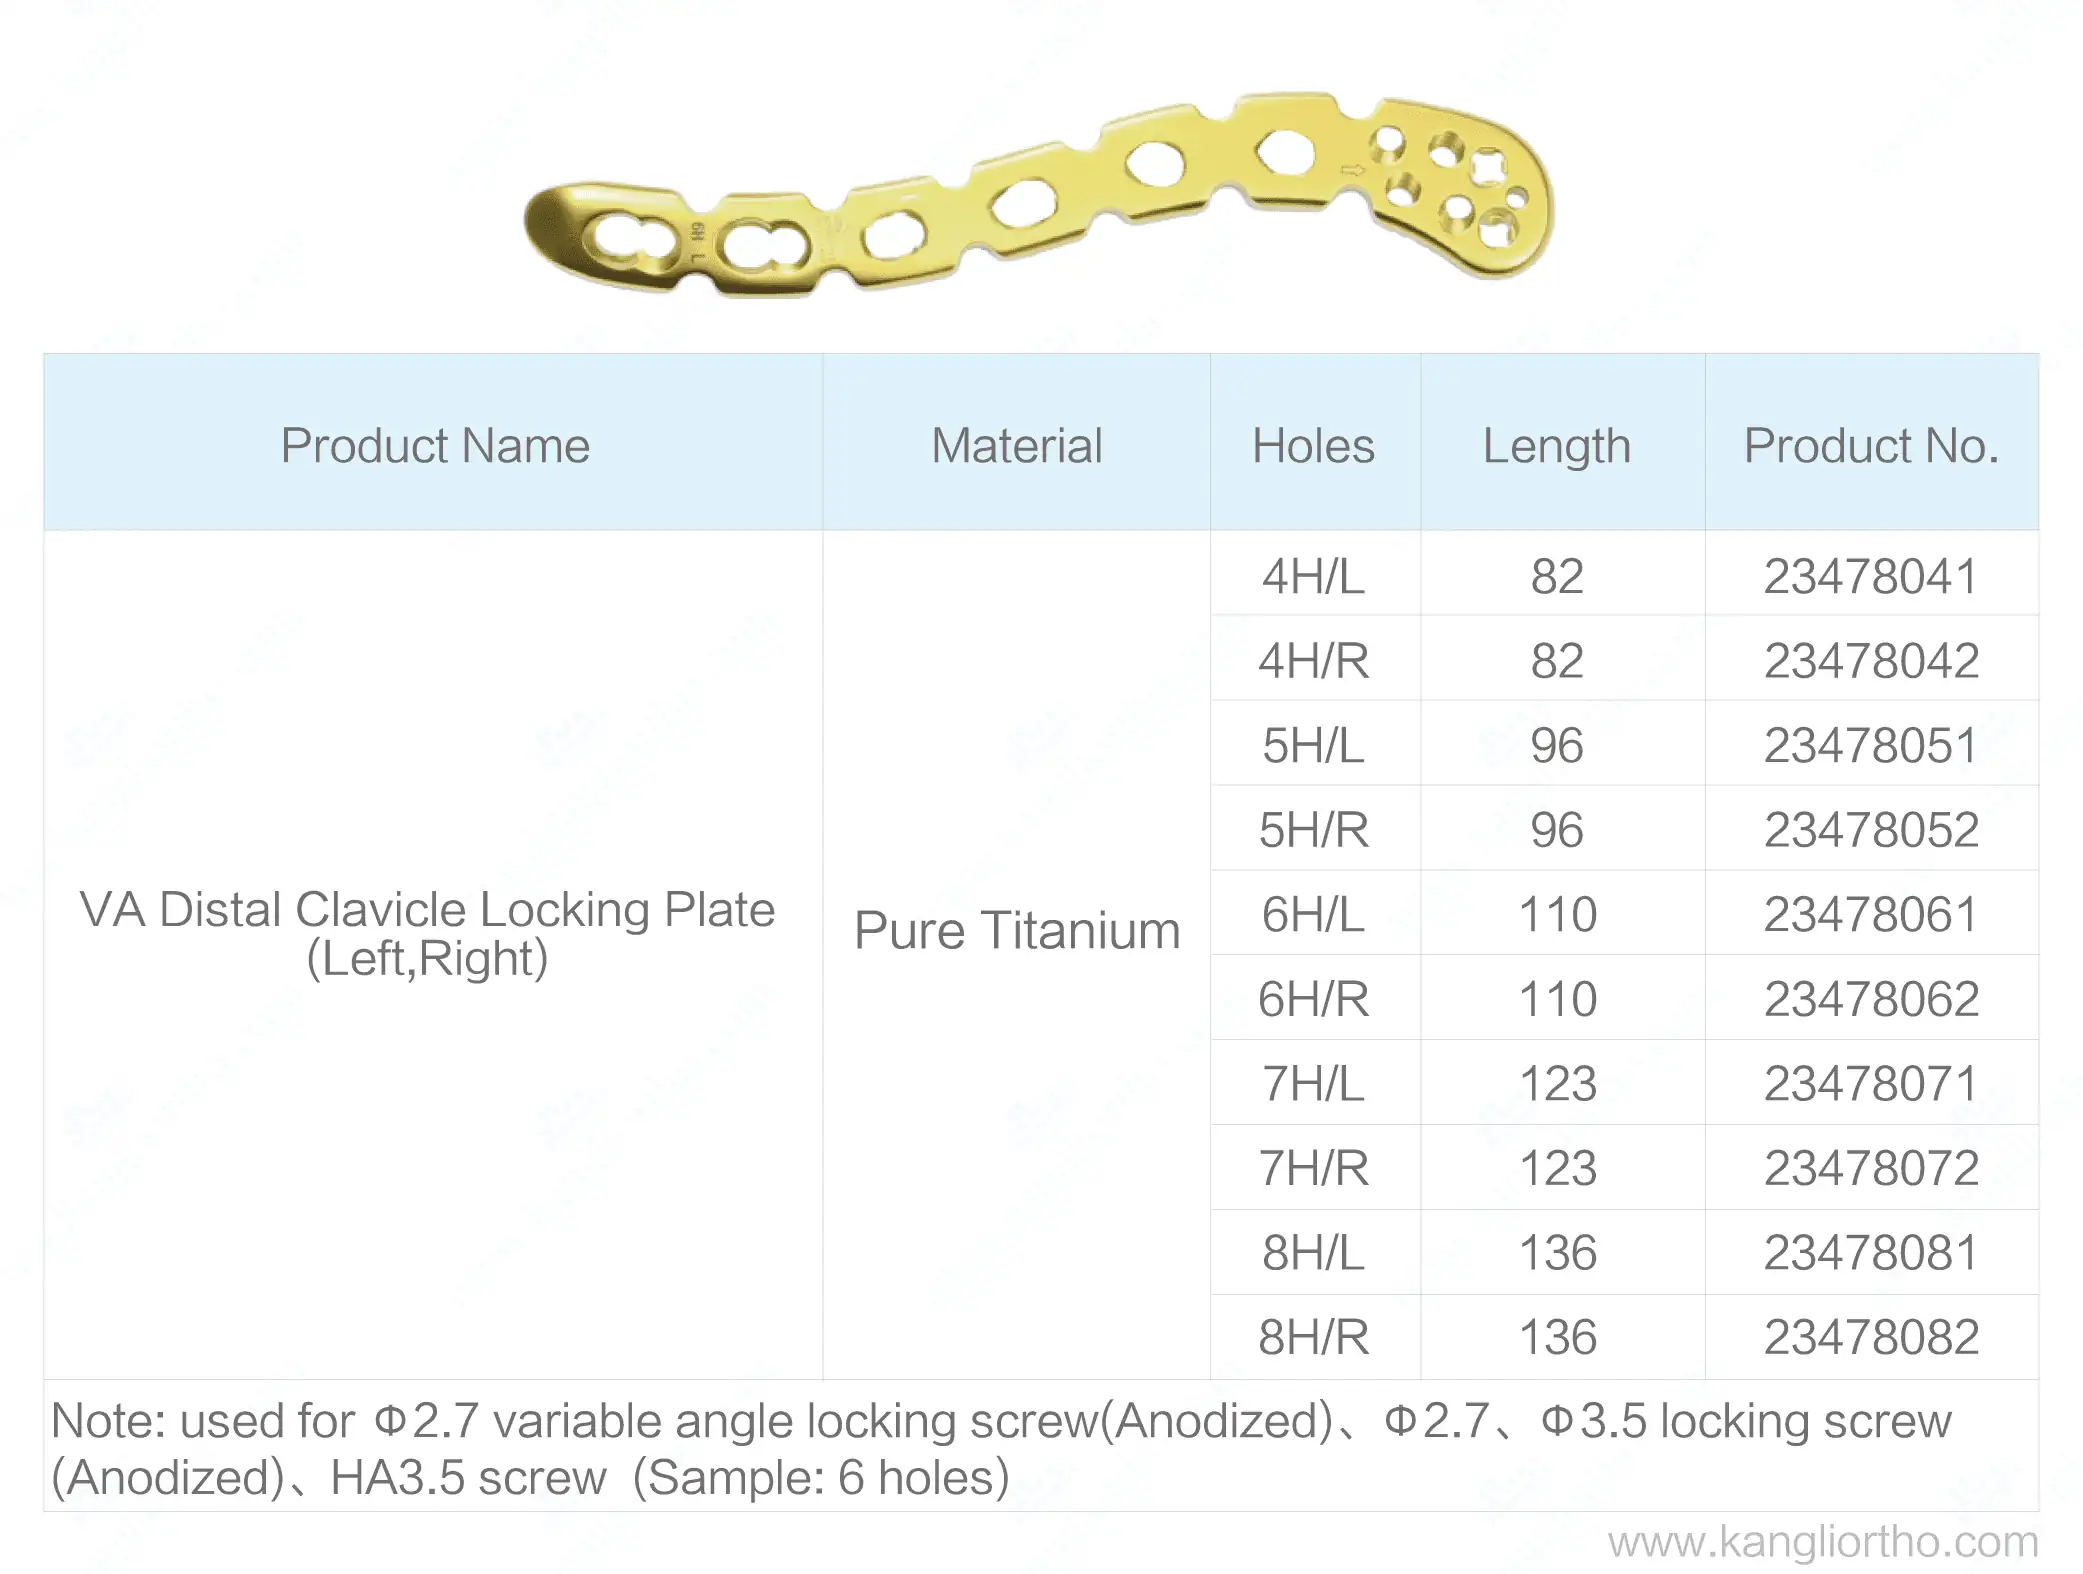 va-distal-clavicle-locking-plate-specifications